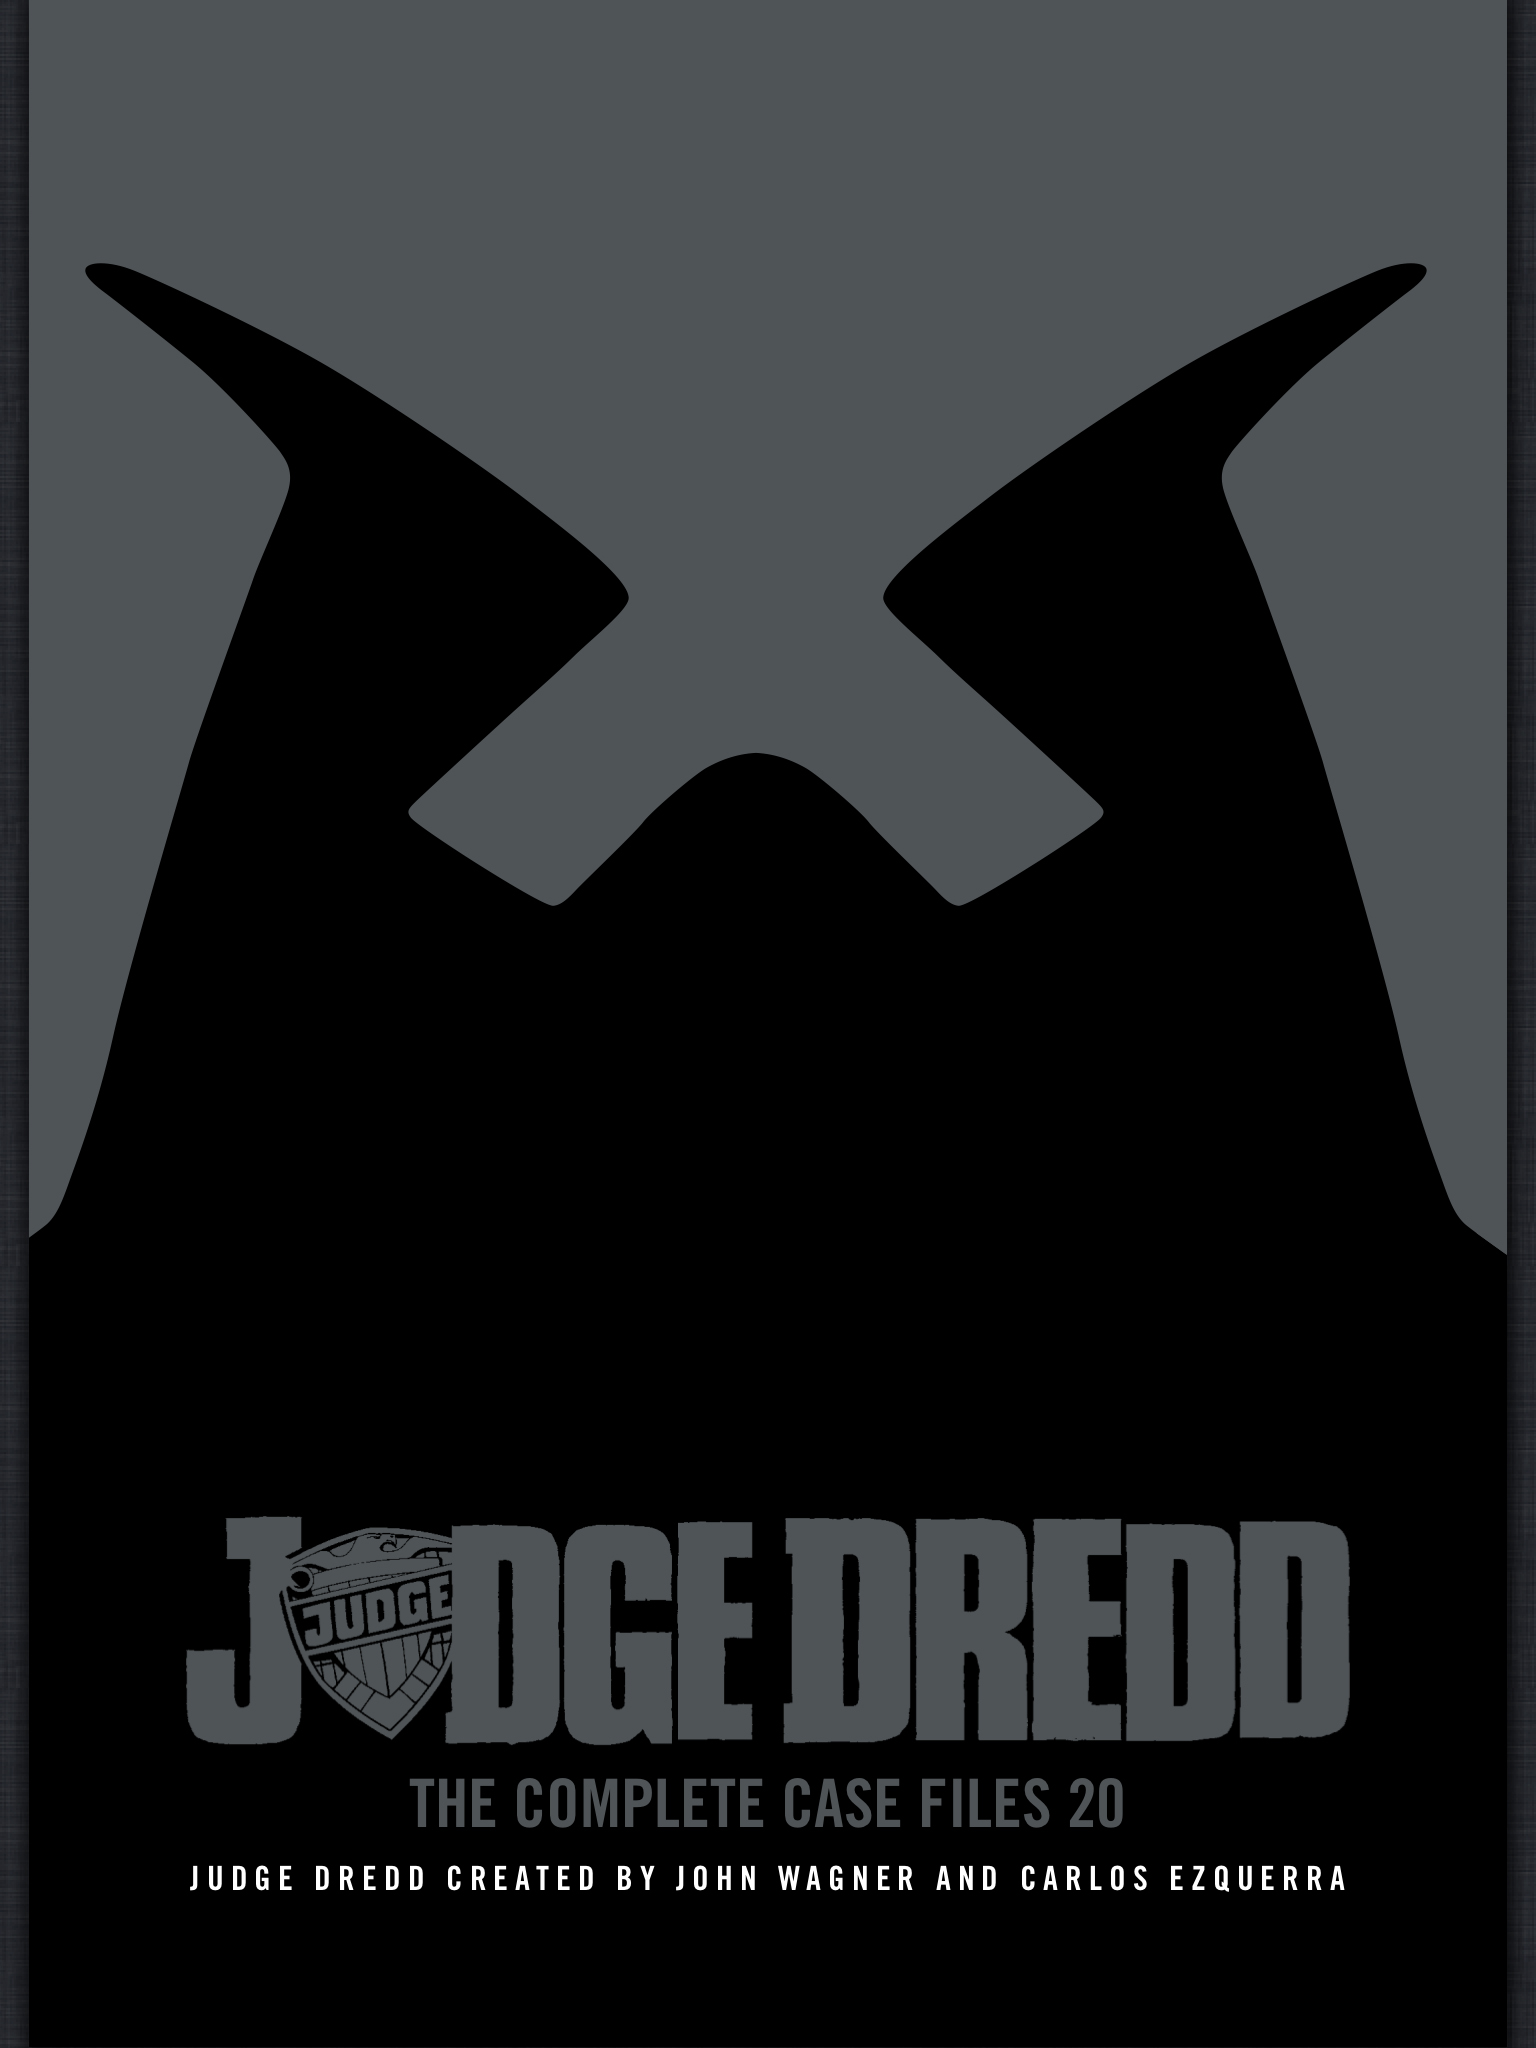 Read online Judge Dredd: The Complete Case Files comic -  Issue # TPB 20 - 3